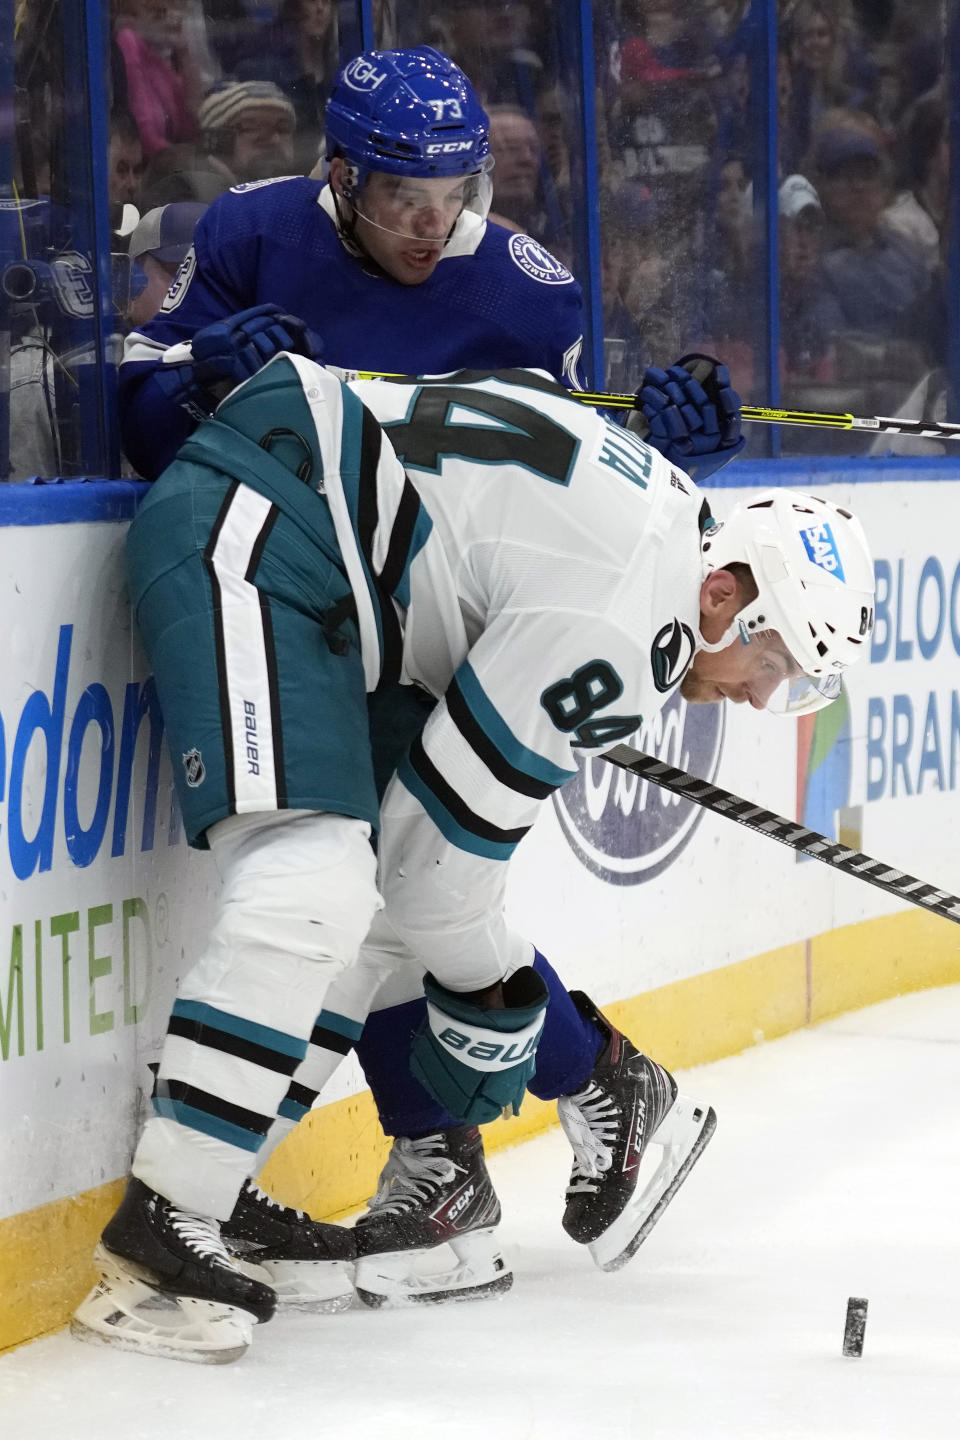 San Jose Sharks defenseman Jan Rutta (84) checks Tampa Bay Lightning left wing Conor Sheary (73) in the boards during the second period of an NHL hockey game Thursday, Oct. 26, 2023, in Tampa, Fla. (AP Photo/Chris O'Meara)